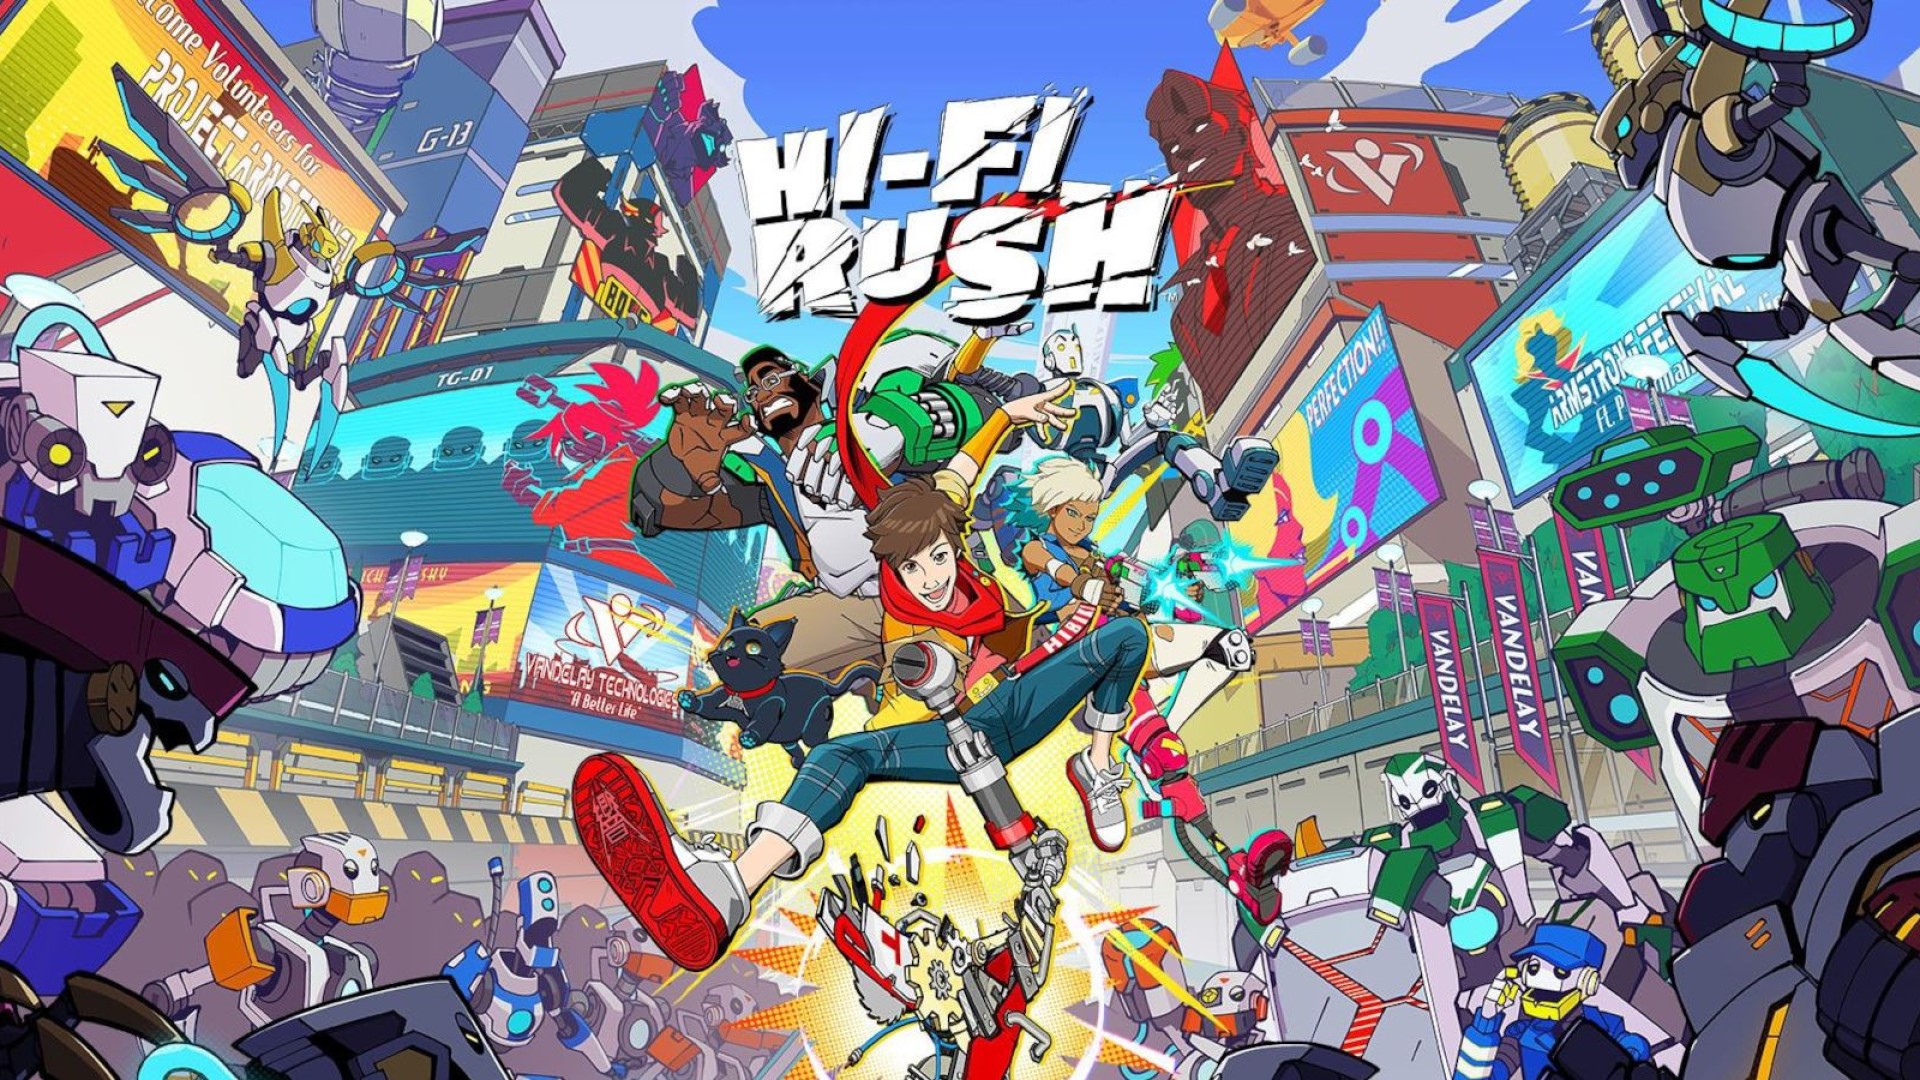 Hi-Fi Rush Announced for PS5 in Now-Private Trailer, Launches March 18th